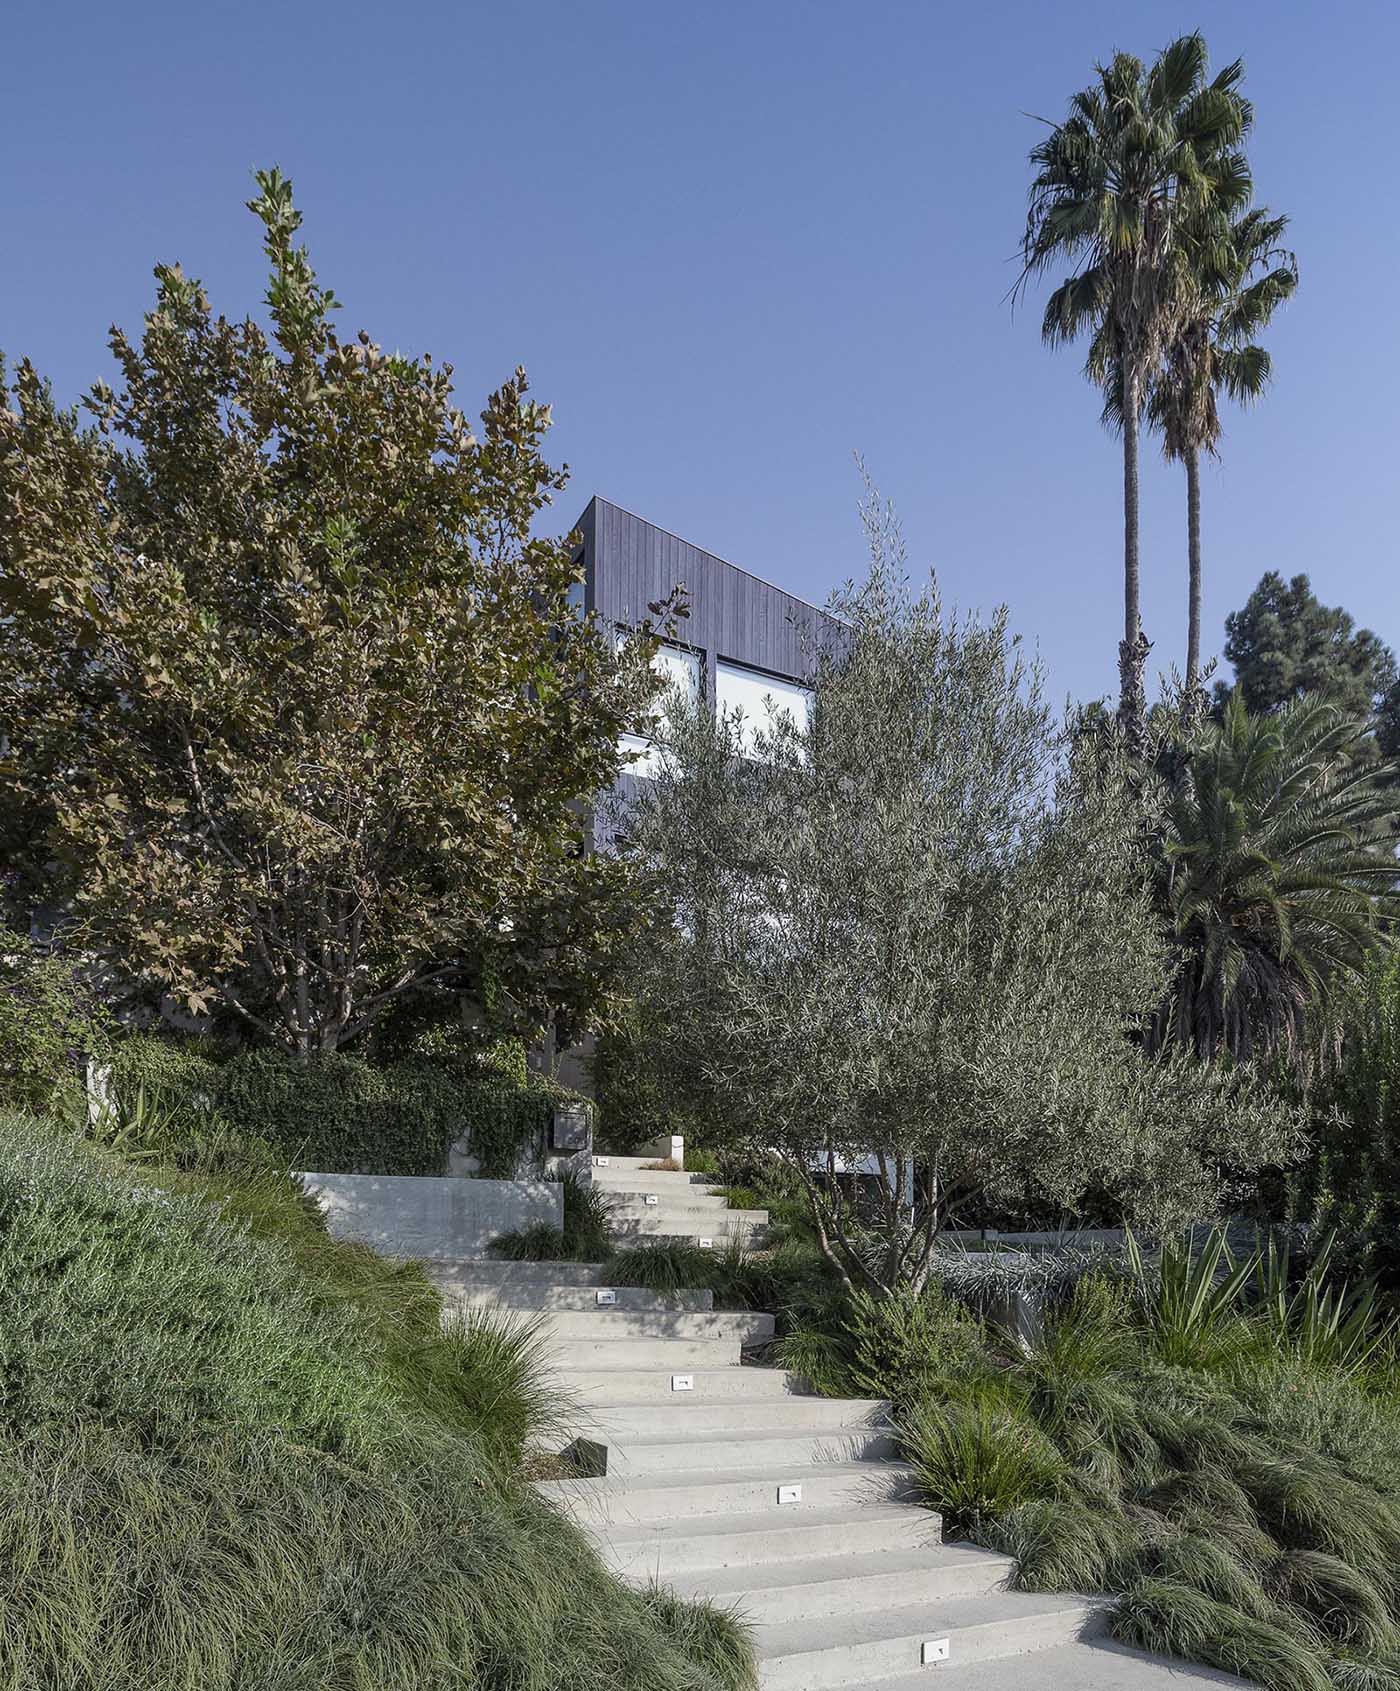 Mature landscaping is separated by concrete stairs that lead up to the house, and at night, lighting creates a guided path.